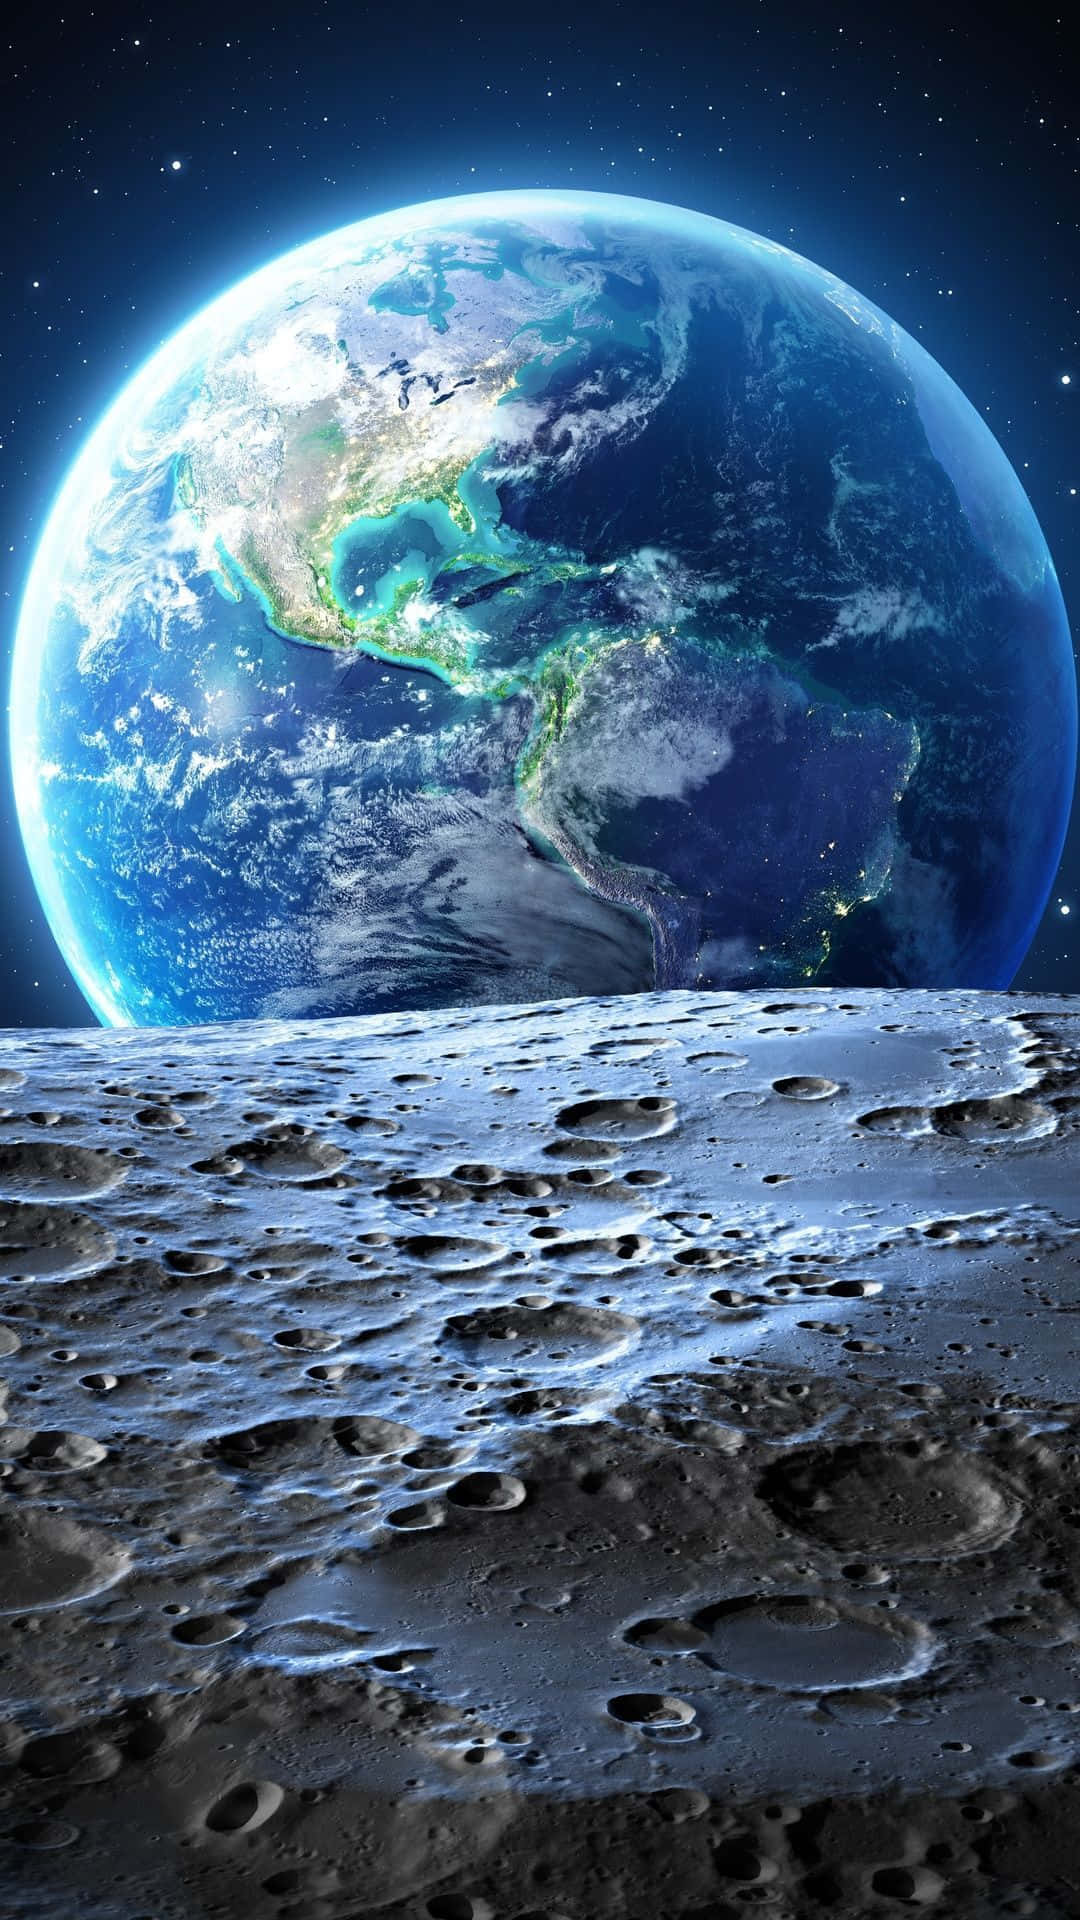 Premium AI Image  Earth wallpapers for iphone and android the best high  definition iphone wallpapers for iphone and android this wallpaper is high  definition and has a great quality earth wallpaper